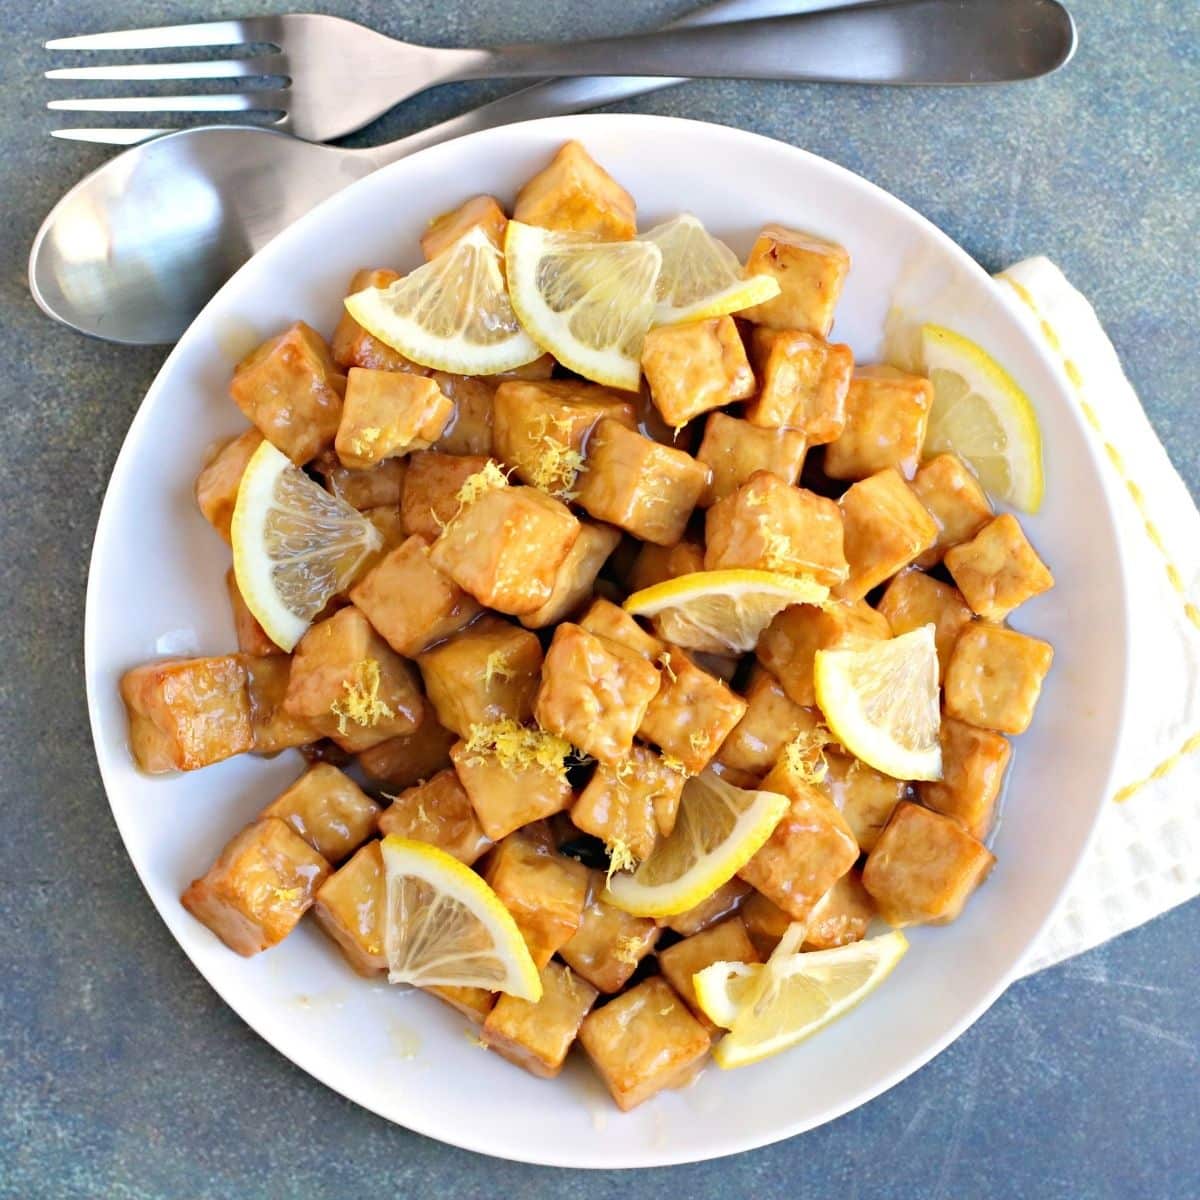 Plate of air fried tofu coated with lemon sauce and garnished with fresh lemon